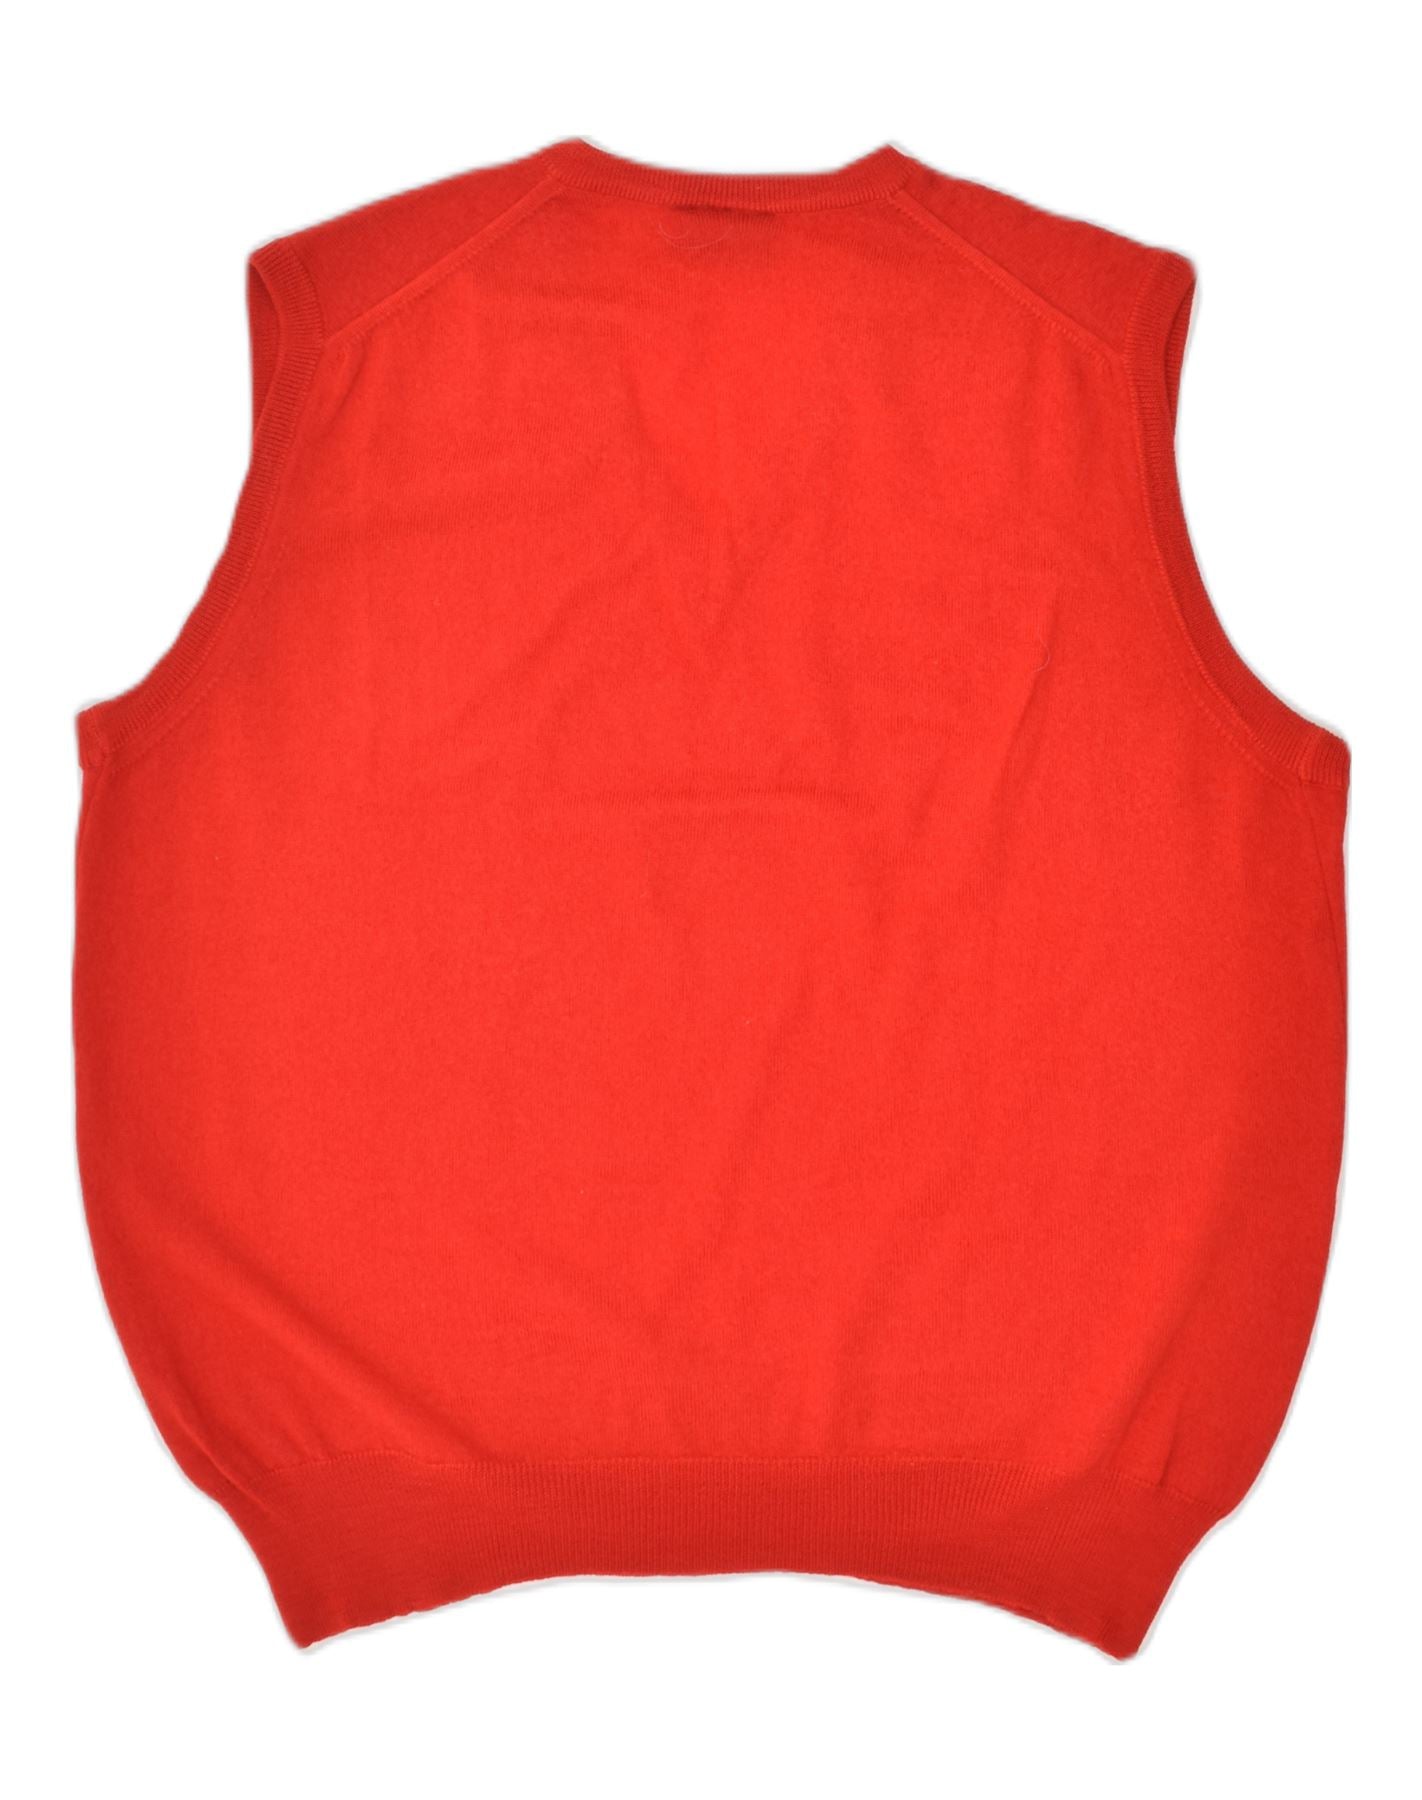 Red Tank Top - Buy Online, Clothing